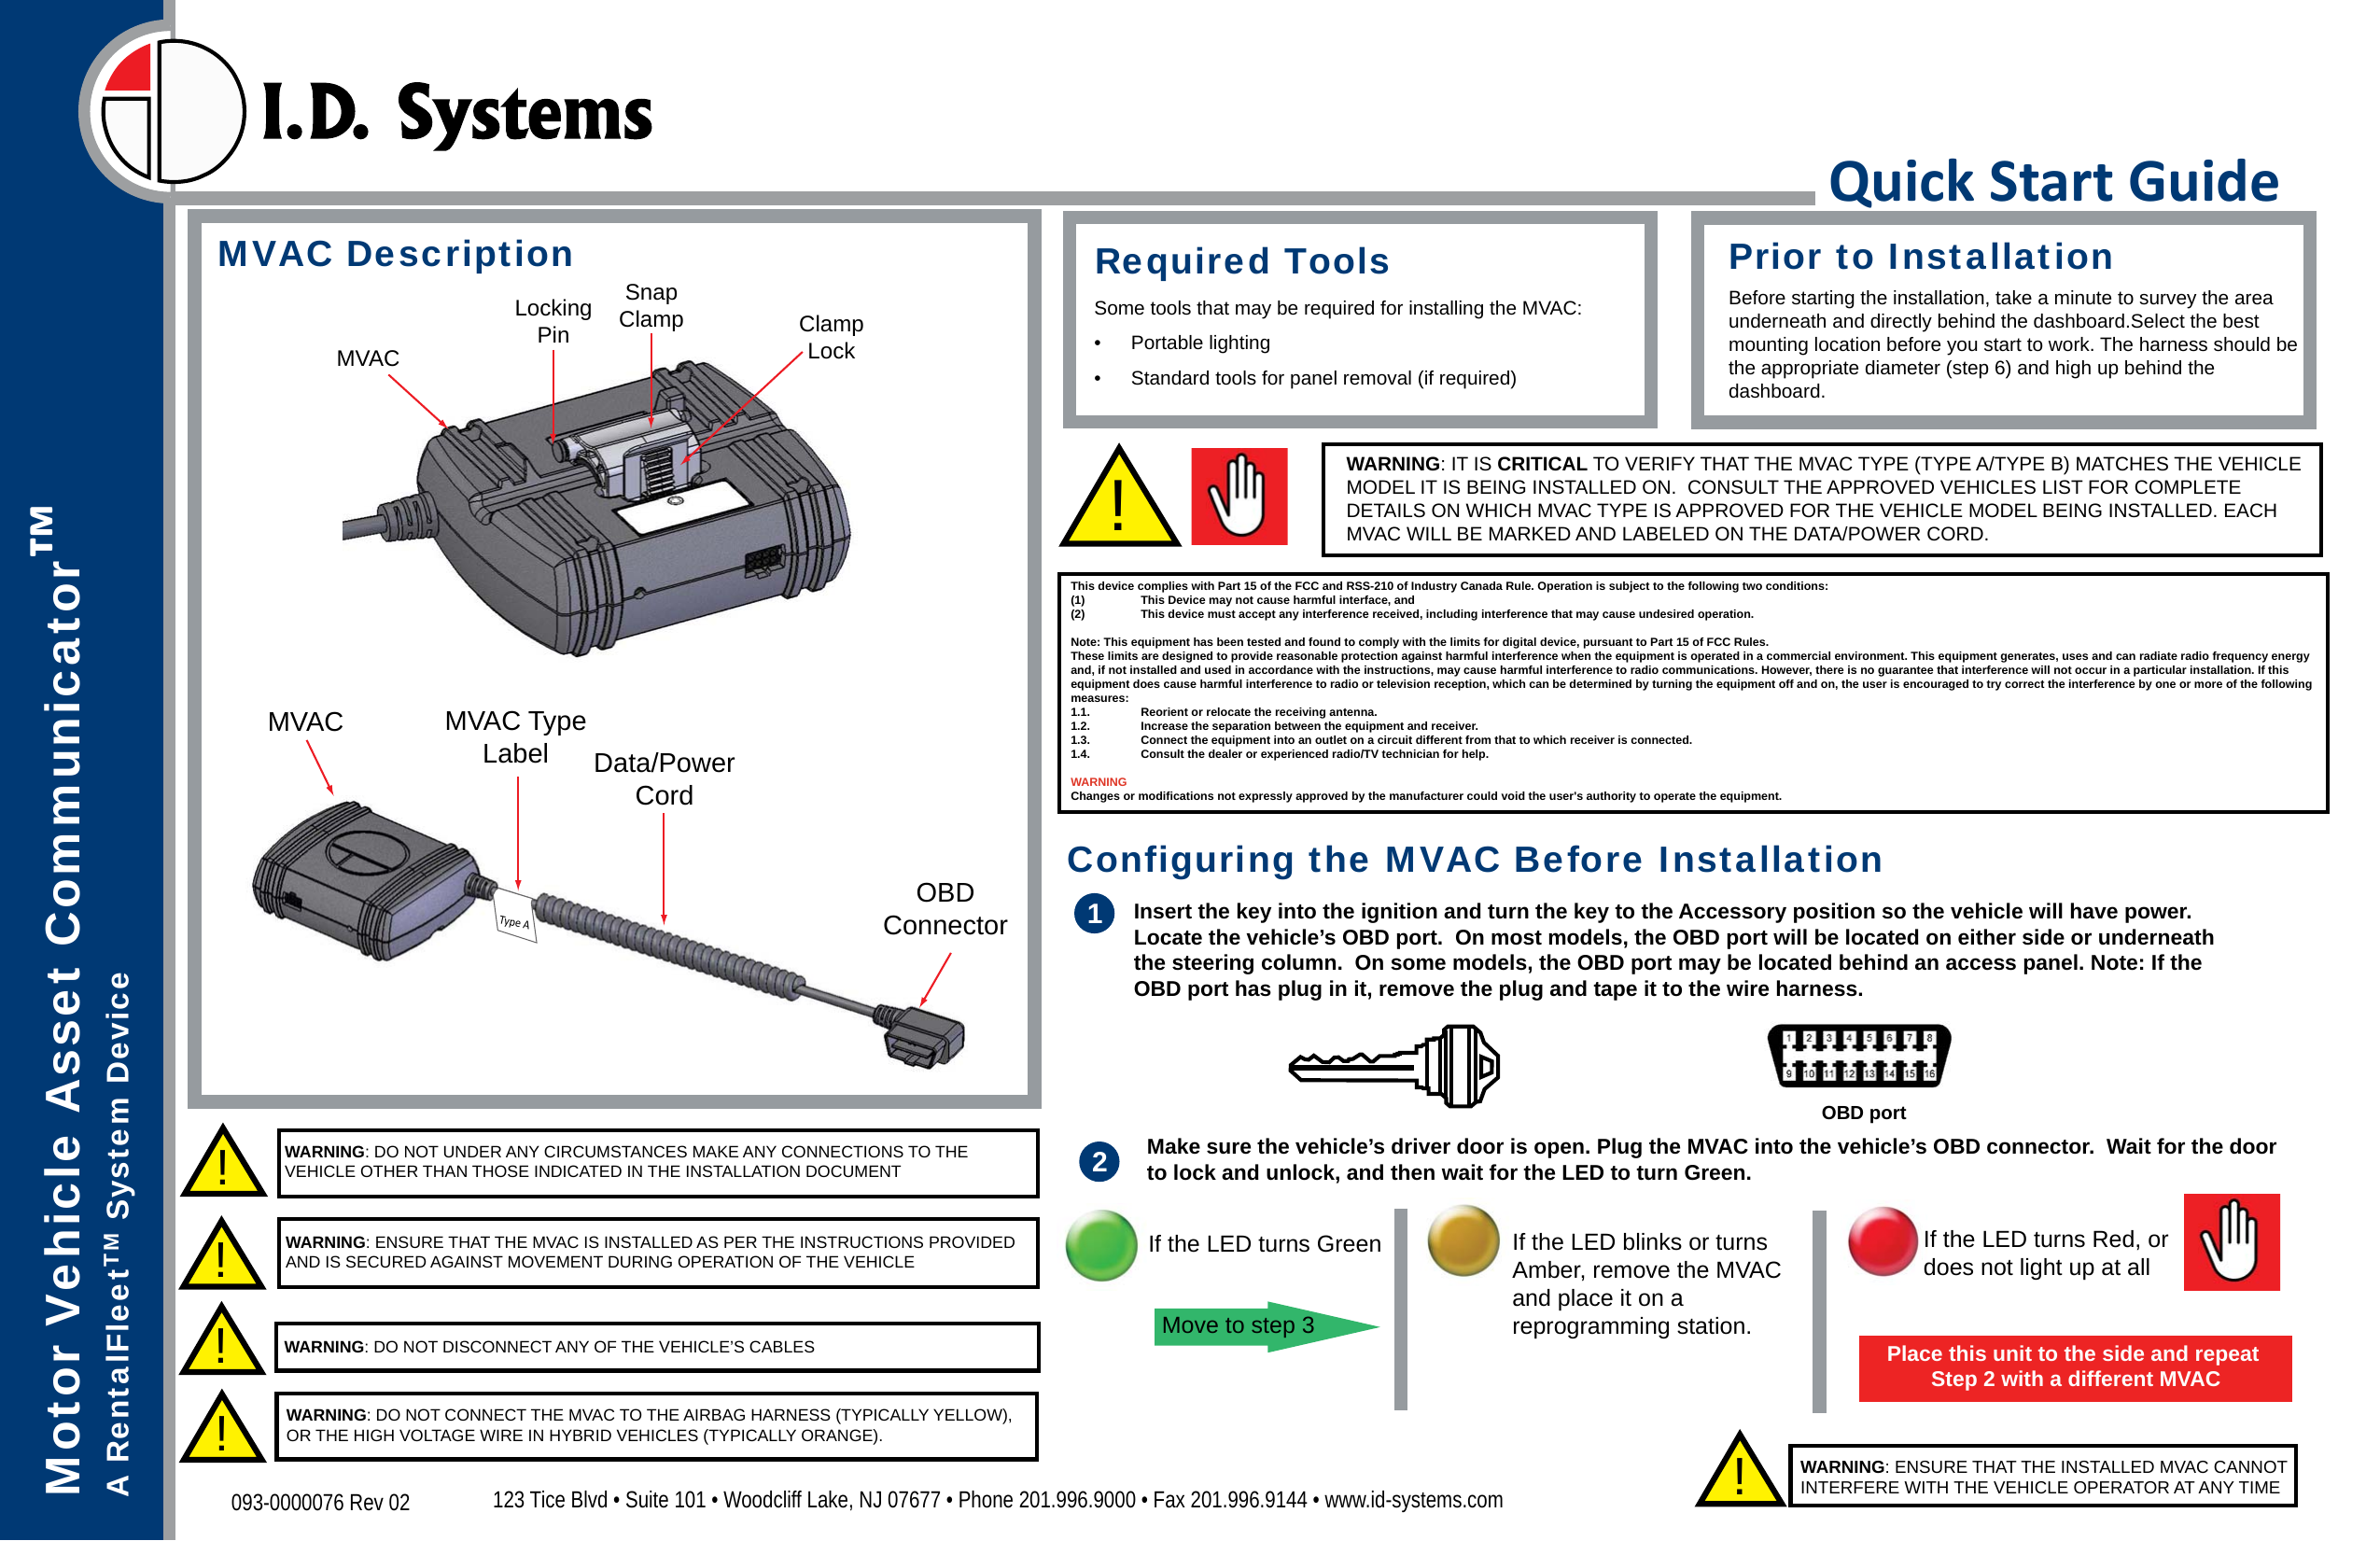 Quick Start GuideMotor Vehicle Asset Communicator™A RentalFleetTM System Device123 Tice Blvd • Suite 101 • Woodcliff Lake, NJ 07677 • Phone 201.996.9000 • Fax 201.996.9144 • www.id-systems.com093-0000076 Rev 02MVACOBDConnectorData/PowerCordMVACLockingPinSnapClamp ClampLockMVAC Description!WARNING: DO NOT UNDER ANY CIRCUMSTANCES MAKE ANY CONNECTIONS TO THE VEHICLE OTHER THAN THOSE INDICATED IN THE INSTALLATION DOCUMENT!WARNING: ENSURE THAT THE MVAC IS INSTALLED AS PER THE INSTRUCTIONS PROVIDED AND IS SECURED AGAINST MOVEMENT DURING OPERATION OF THE VEHICLE!WARNING: ENSURE THAT THE INSTALLED MVAC CANNOT INTERFERE WITH THE VEHICLE OPERATOR AT ANY TIME !WARNING: DO NOT DISCONNECT ANY OF THE VEHICLE’S CABLESPrior to InstallationBefore starting the installation, take a minute to survey the area underneath and directly behind the dashboard.Select the best mounting location before you start to work. The harness should bethe appropriate diameter (step 6) and high up behind the dashboard.Required ToolsSome tools that may be required for installing the MVAC:• Portable lighting•  Standard tools for panel removal (if required)1Insert the key into the ignition and turn the key to the Accessory position so the vehicle will have power. Locate the vehicle’s OBD port.  On most models, the OBD port will be located on either side or underneath the steering column.  On some models, the OBD port may be located behind an access panel. Note: If the OBD port has plug in it, remove the plug and tape it to the wire harness.OBD portConfiguring the MVAC Before InstallationMake sure the vehicle’s driver door is open. Plug the MVAC into the vehicle’s OBD connector.  Wait for the door to lock and unlock, and then wait for the LED to turn Green. 2If the LED turns GreenMove to step 3If the LED turns Red, ordoes not light up at all Place this unit to the side and repeat Step 2 with a different MVACWARNING: DO NOT CONNECT THE MVAC TO THE AIRBAG HARNESS (TYPICALLY YELLOW), OR THE HIGH VOLTAGE WIRE IN HYBRID VEHICLES (TYPICALLY ORANGE).!Type AMVAC TypeLabelWARNING: IT IS CRITICAL TO VERIFY THAT THE MVAC TYPE (TYPE A/TYPE B) MATCHES THE VEHICLE MODEL IT IS BEING INSTALLED ON.  CONSULT THE APPROVED VEHICLES LIST FOR COMPLETE DETAILS ON WHICH MVAC TYPE IS APPROVED FOR THE VEHICLE MODEL BEING INSTALLED. EACH MVAC WILL BE MARKED AND LABELED ON THE DATA/POWER CORD. !If the LED blinks or turns Amber, remove the MVAC and place it on a reprogramming station.This device complies with Part 15 of the FCC and RSS-210 of Industry Canada Rule. Operation is subject to the following two conditions: (1)  This Device may not cause harmful interface, and(2)  This device must accept any interference received, including interference that may cause undesired operation.Note: This equipment has been tested and found to comply with the limits for digital device, pursuant to Part 15 of FCC Rules. These limits are designed to provide reasonable protection against harmful interference when the equipment is operated in a commercial environment. This equipment generates, uses and can radiate radio frequency energy and, if not installed and used in accordance with the instructions, may cause harmful interference to radio communications. However, there is no guarantee that interference will not occur in a particular installation. If this equipment does cause harmful interference to radio or television reception, which can be determined by turning the equipment off and on, the user is encouraged to try correct the interference by one or more of the following measures:1.1.  Reorient or relocate the receiving antenna.1.2.  Increase the separation between the equipment and receiver.1.3.  Connect the equipment into an outlet on a circuit different from that to which receiver is connected.1.4.  Consult the dealer or experienced radio/TV technician for help.WARNINGChanges or modifications not expressly approved by the manufacturer could void the user&apos;s authority to operate the equipment.